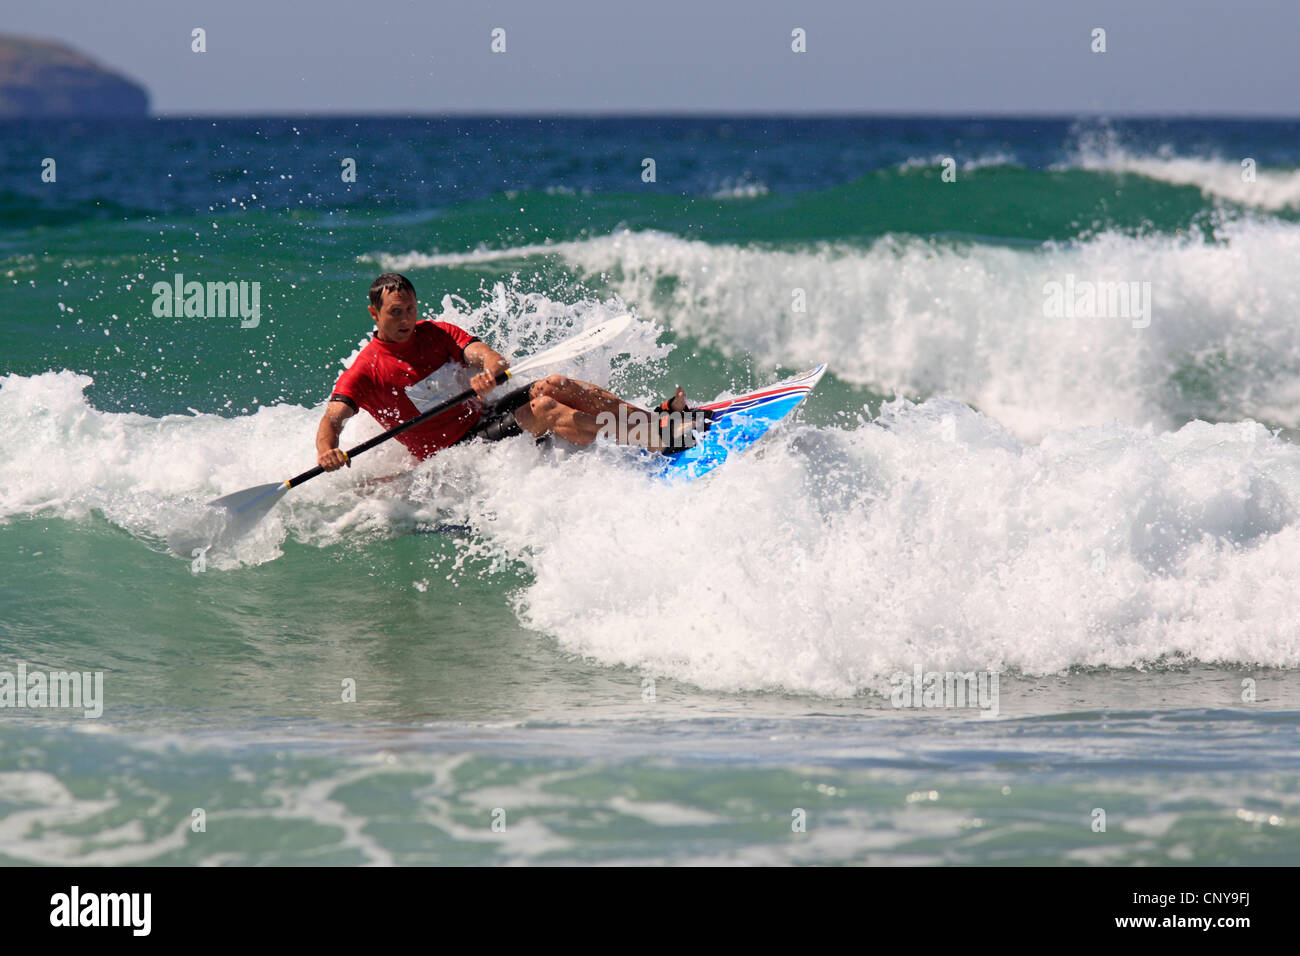 World Champion Waveski Surfer Rees Duncan, competing at the 2009 World Titles at Emerald Beach, Coffs Harbour, NSW, Australia Stock Photo